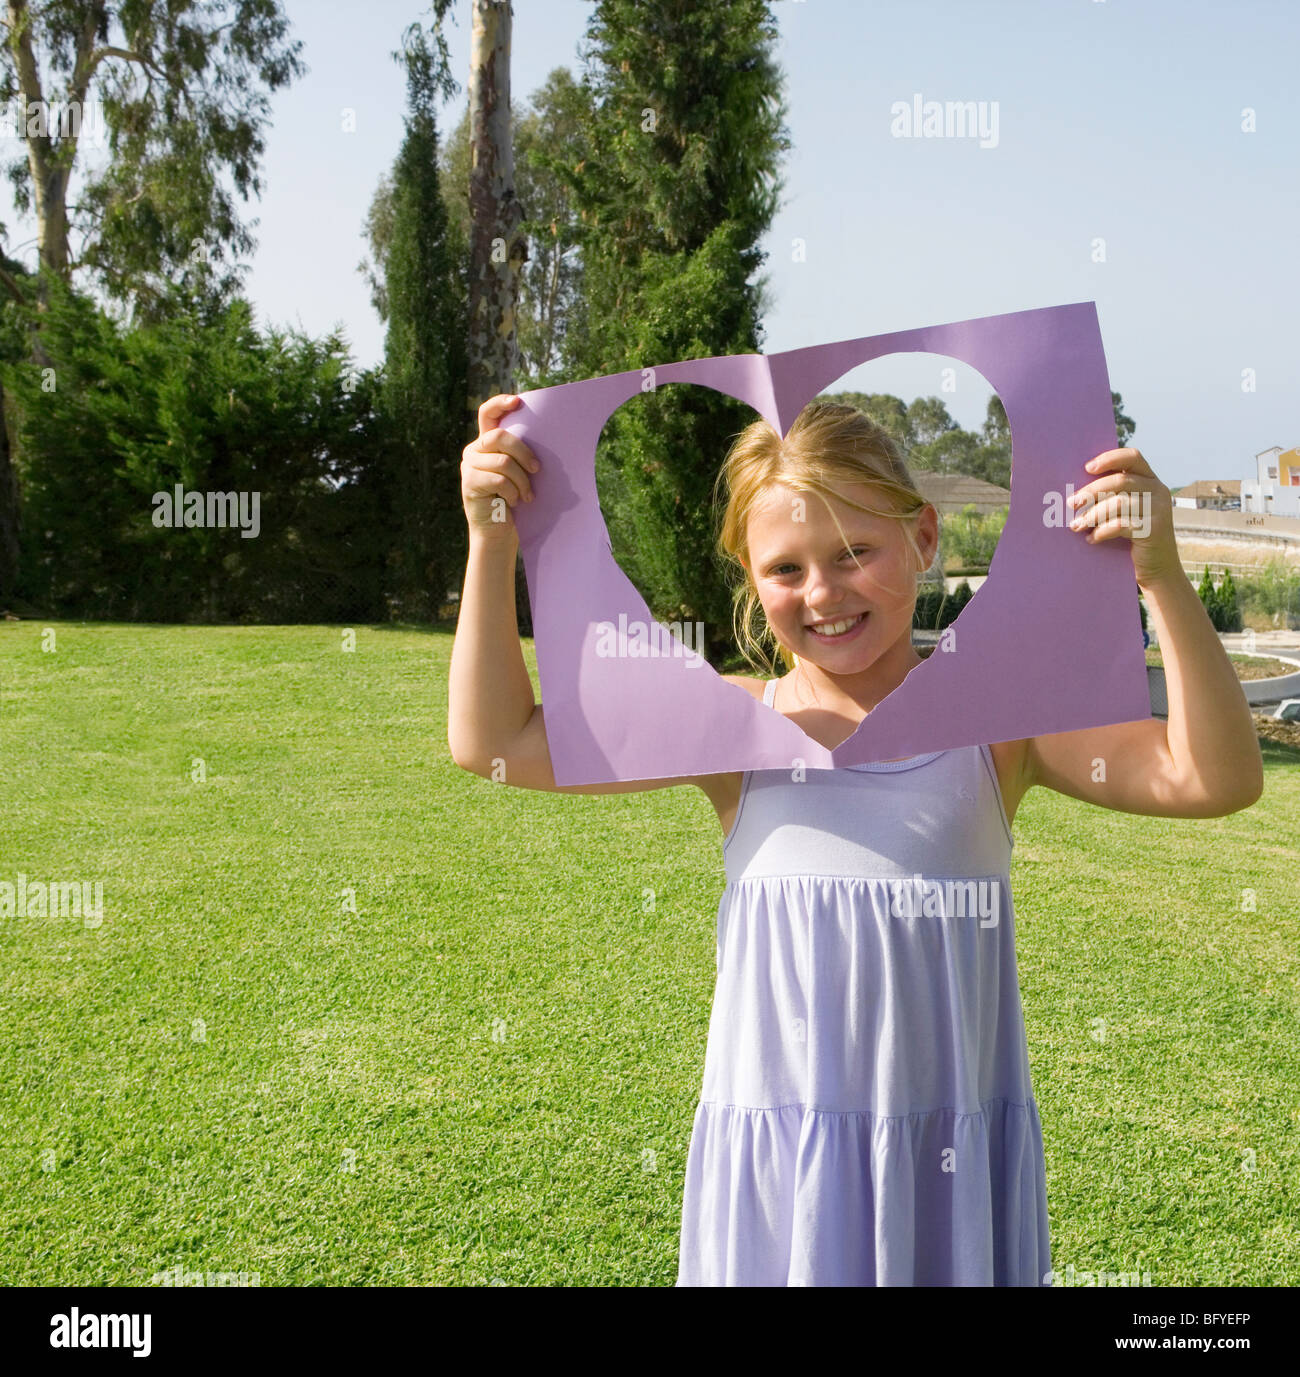 Young Girl holding paper heart frame Banque D'Images